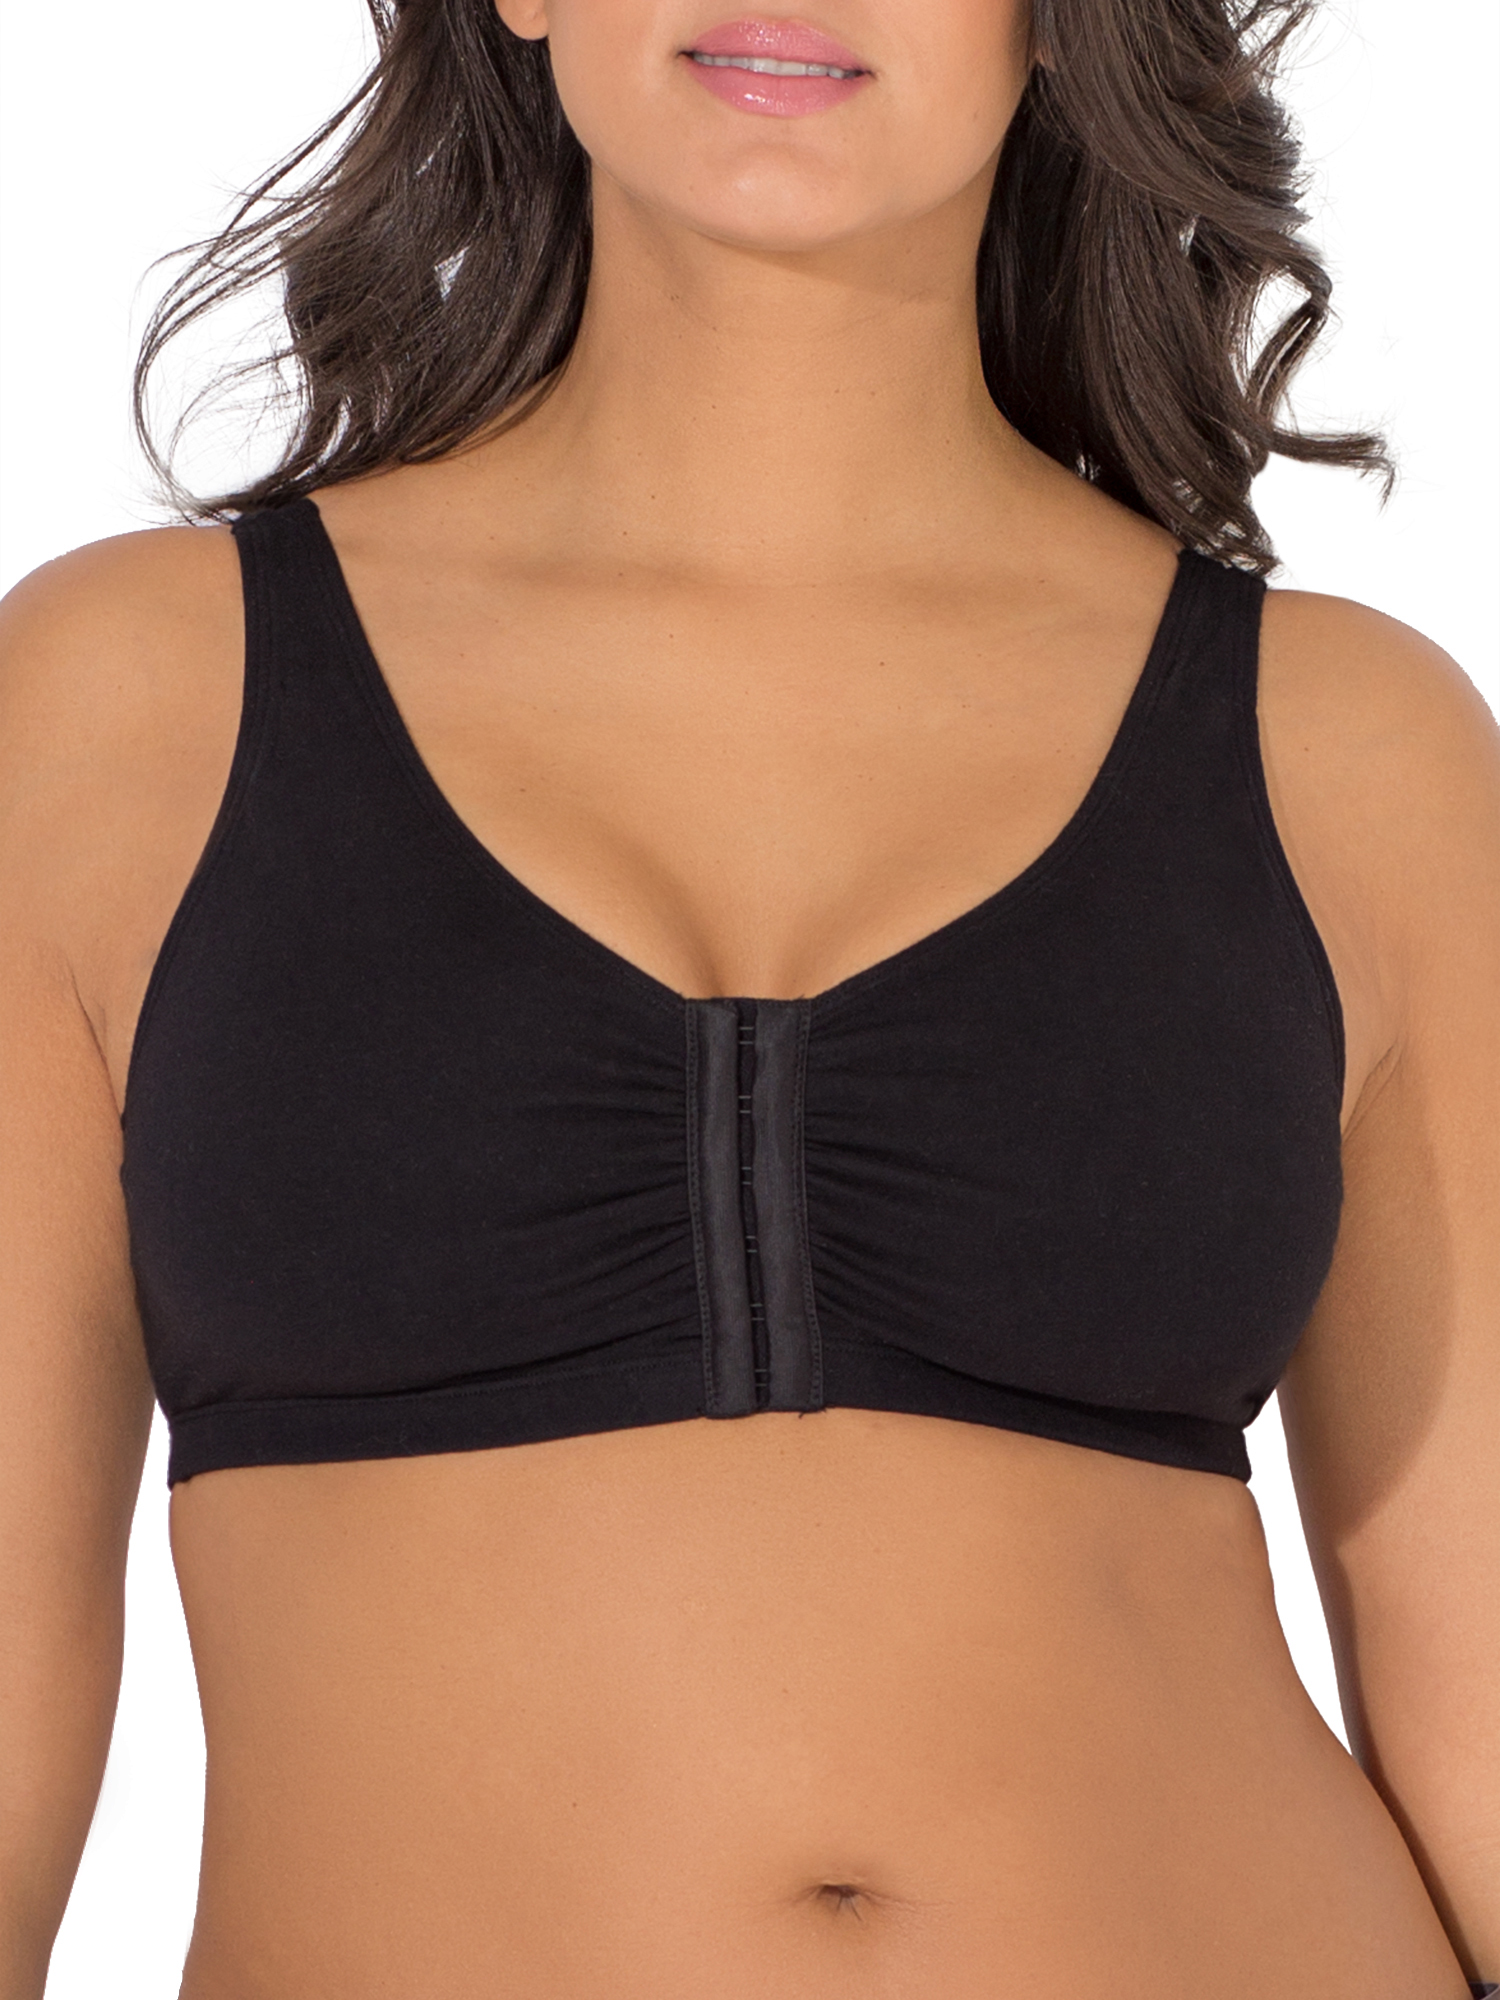 Fruit of the Loom - Comfort Front-Close Sports Bra, Style&nbsp;96014D, 3-Pack - image 3 of 8